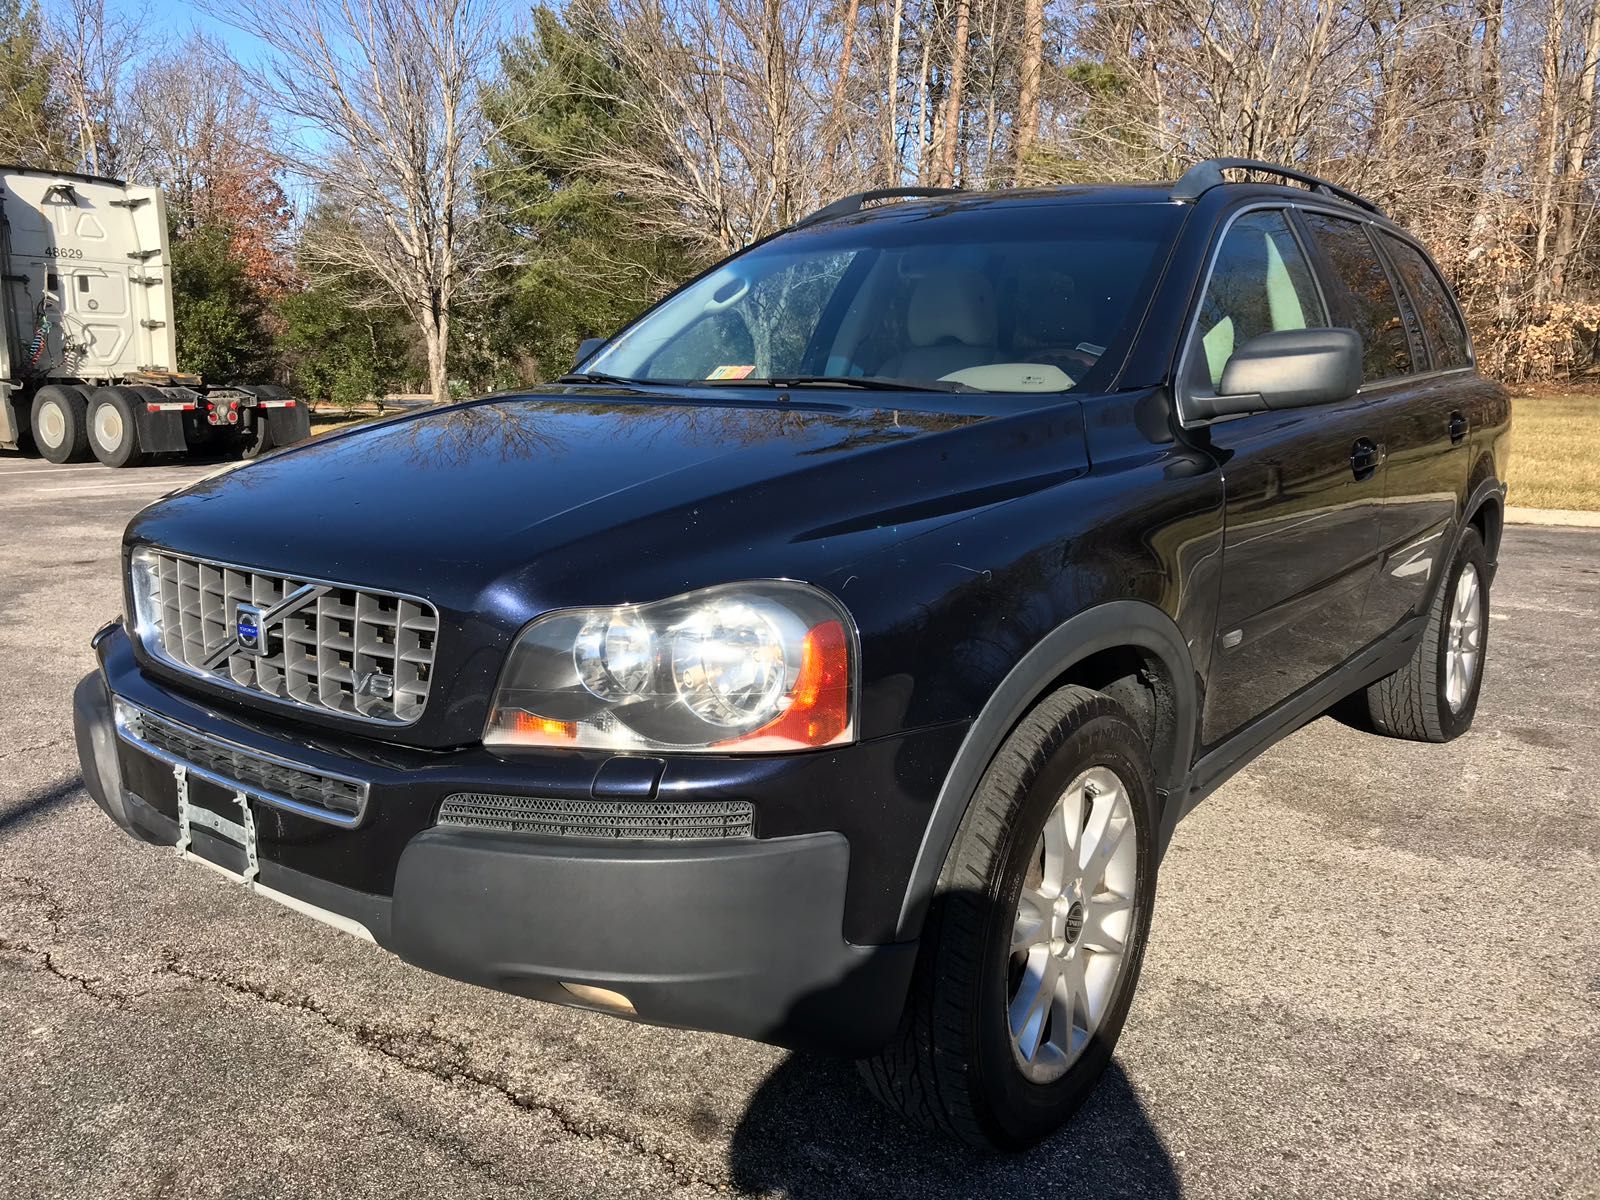 06 VOLVO XC90 V8 DVD ENTERTAINMENT 3RD ROW SUNROOF AUTO CLEAN TITLE 158K